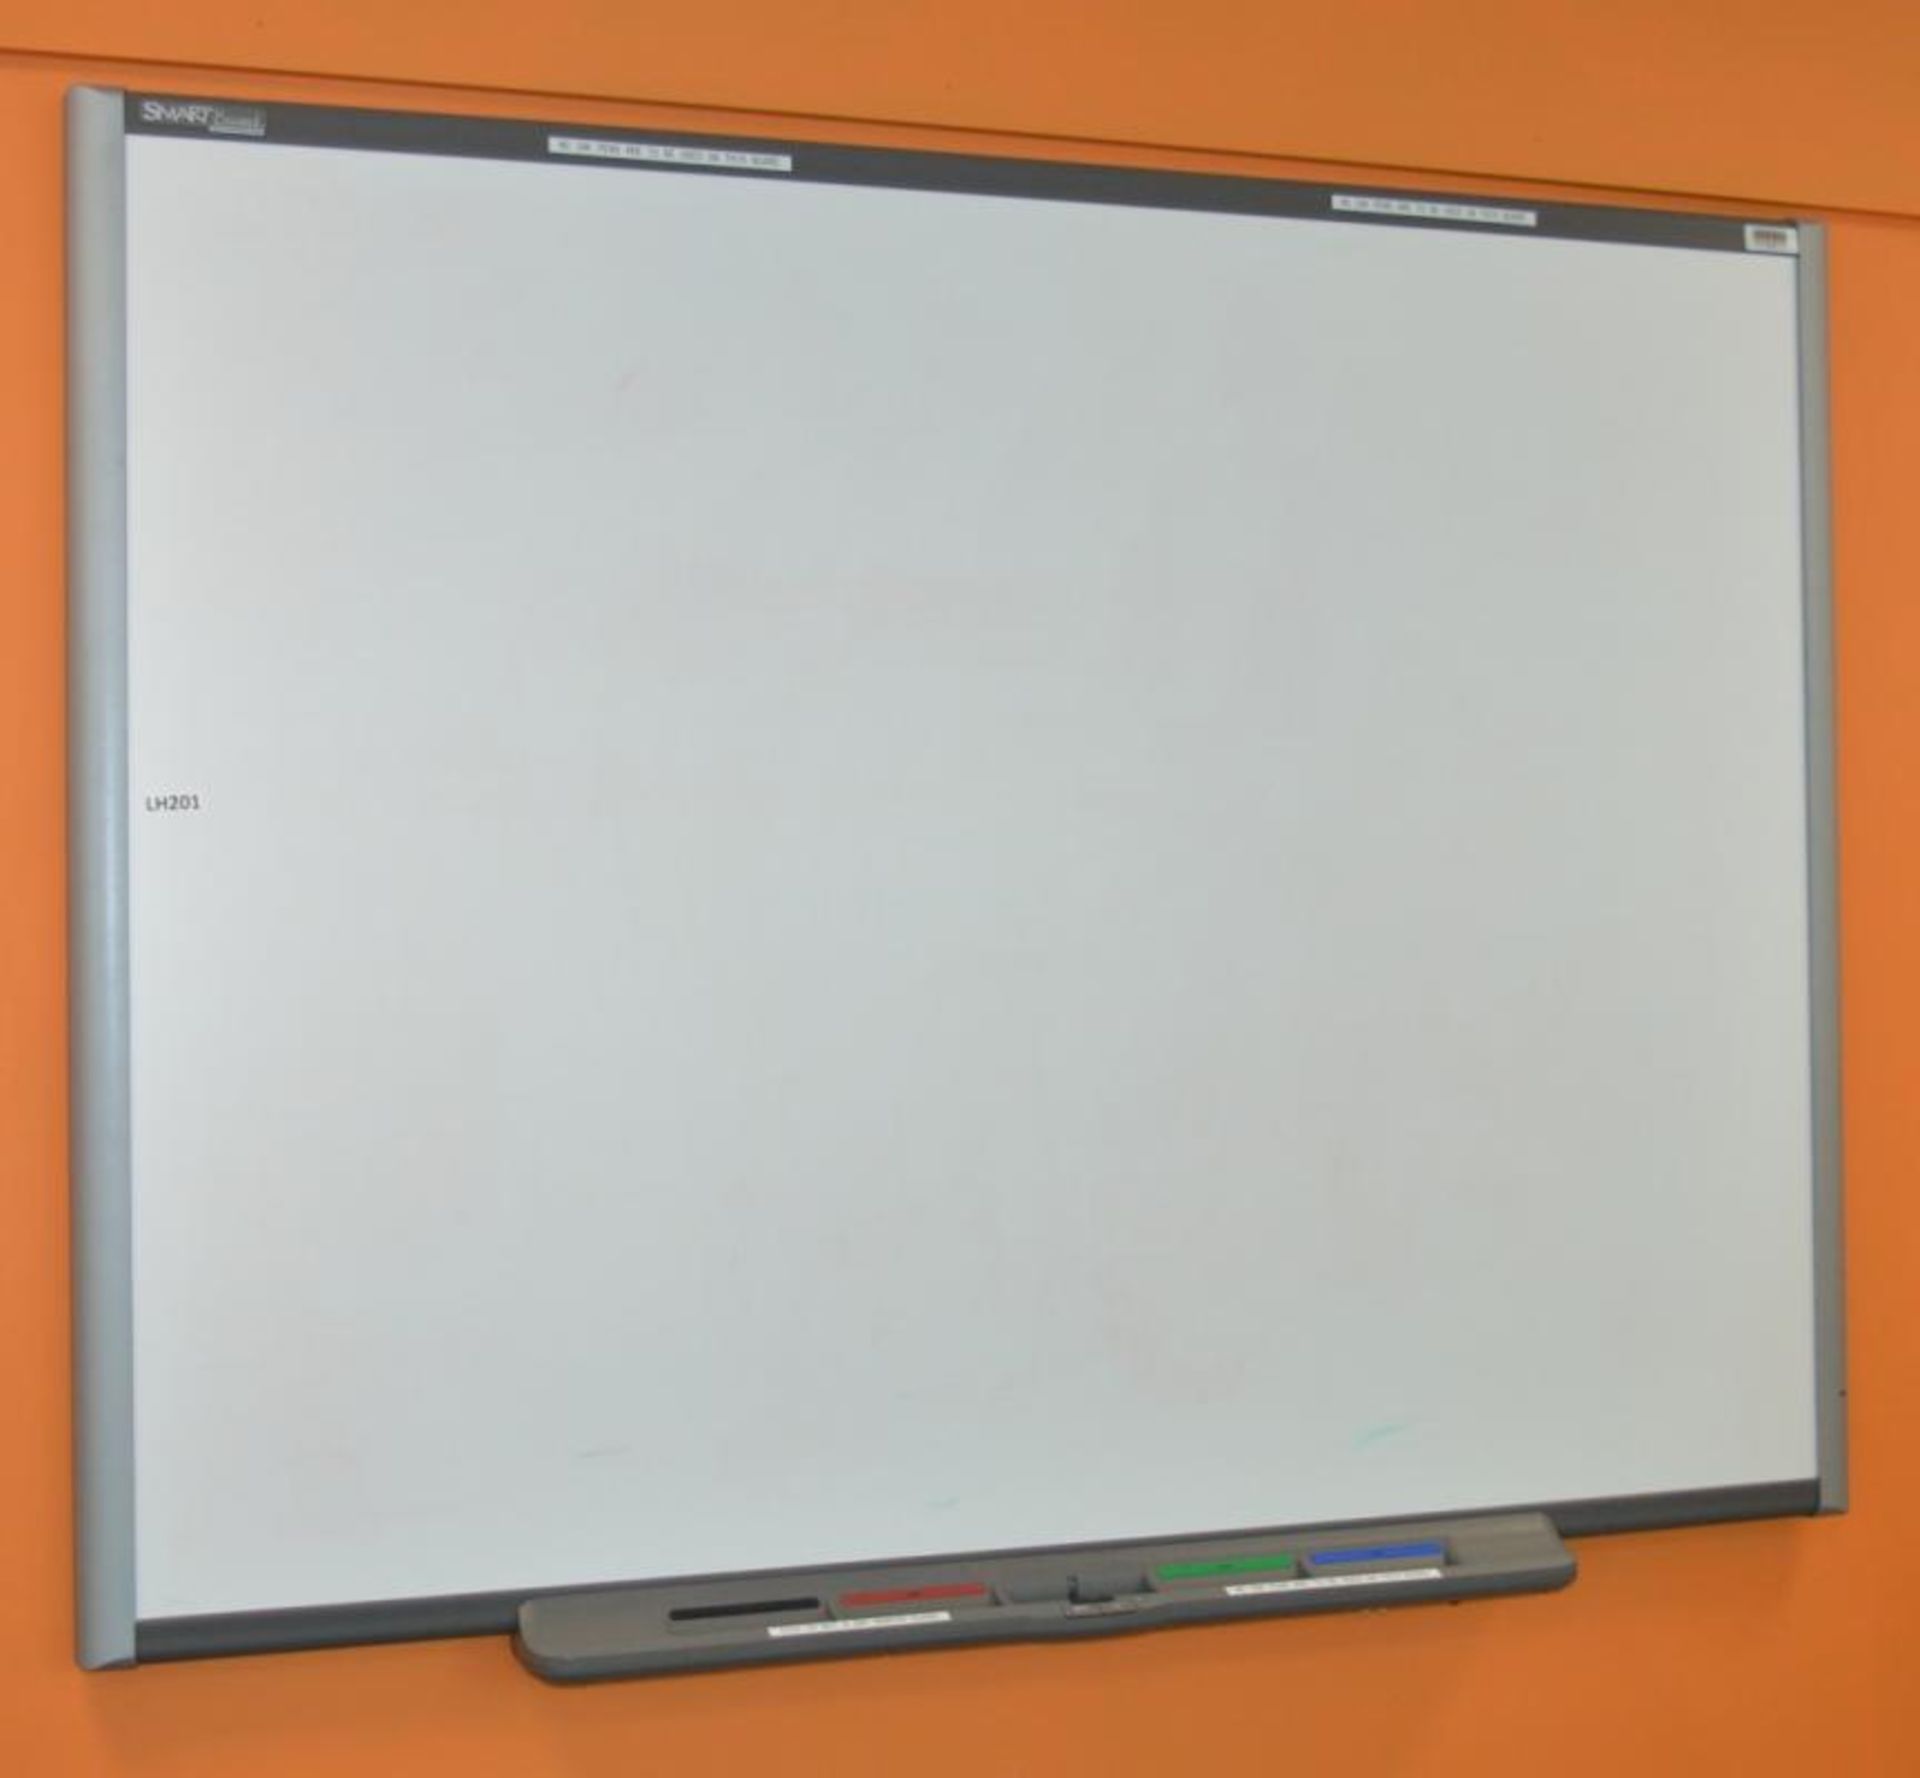 1 x Smart Whiteboard With Selection Of Pens - H126 x W166 cms - CL287 - Ref LH201 - Low Start, No Re